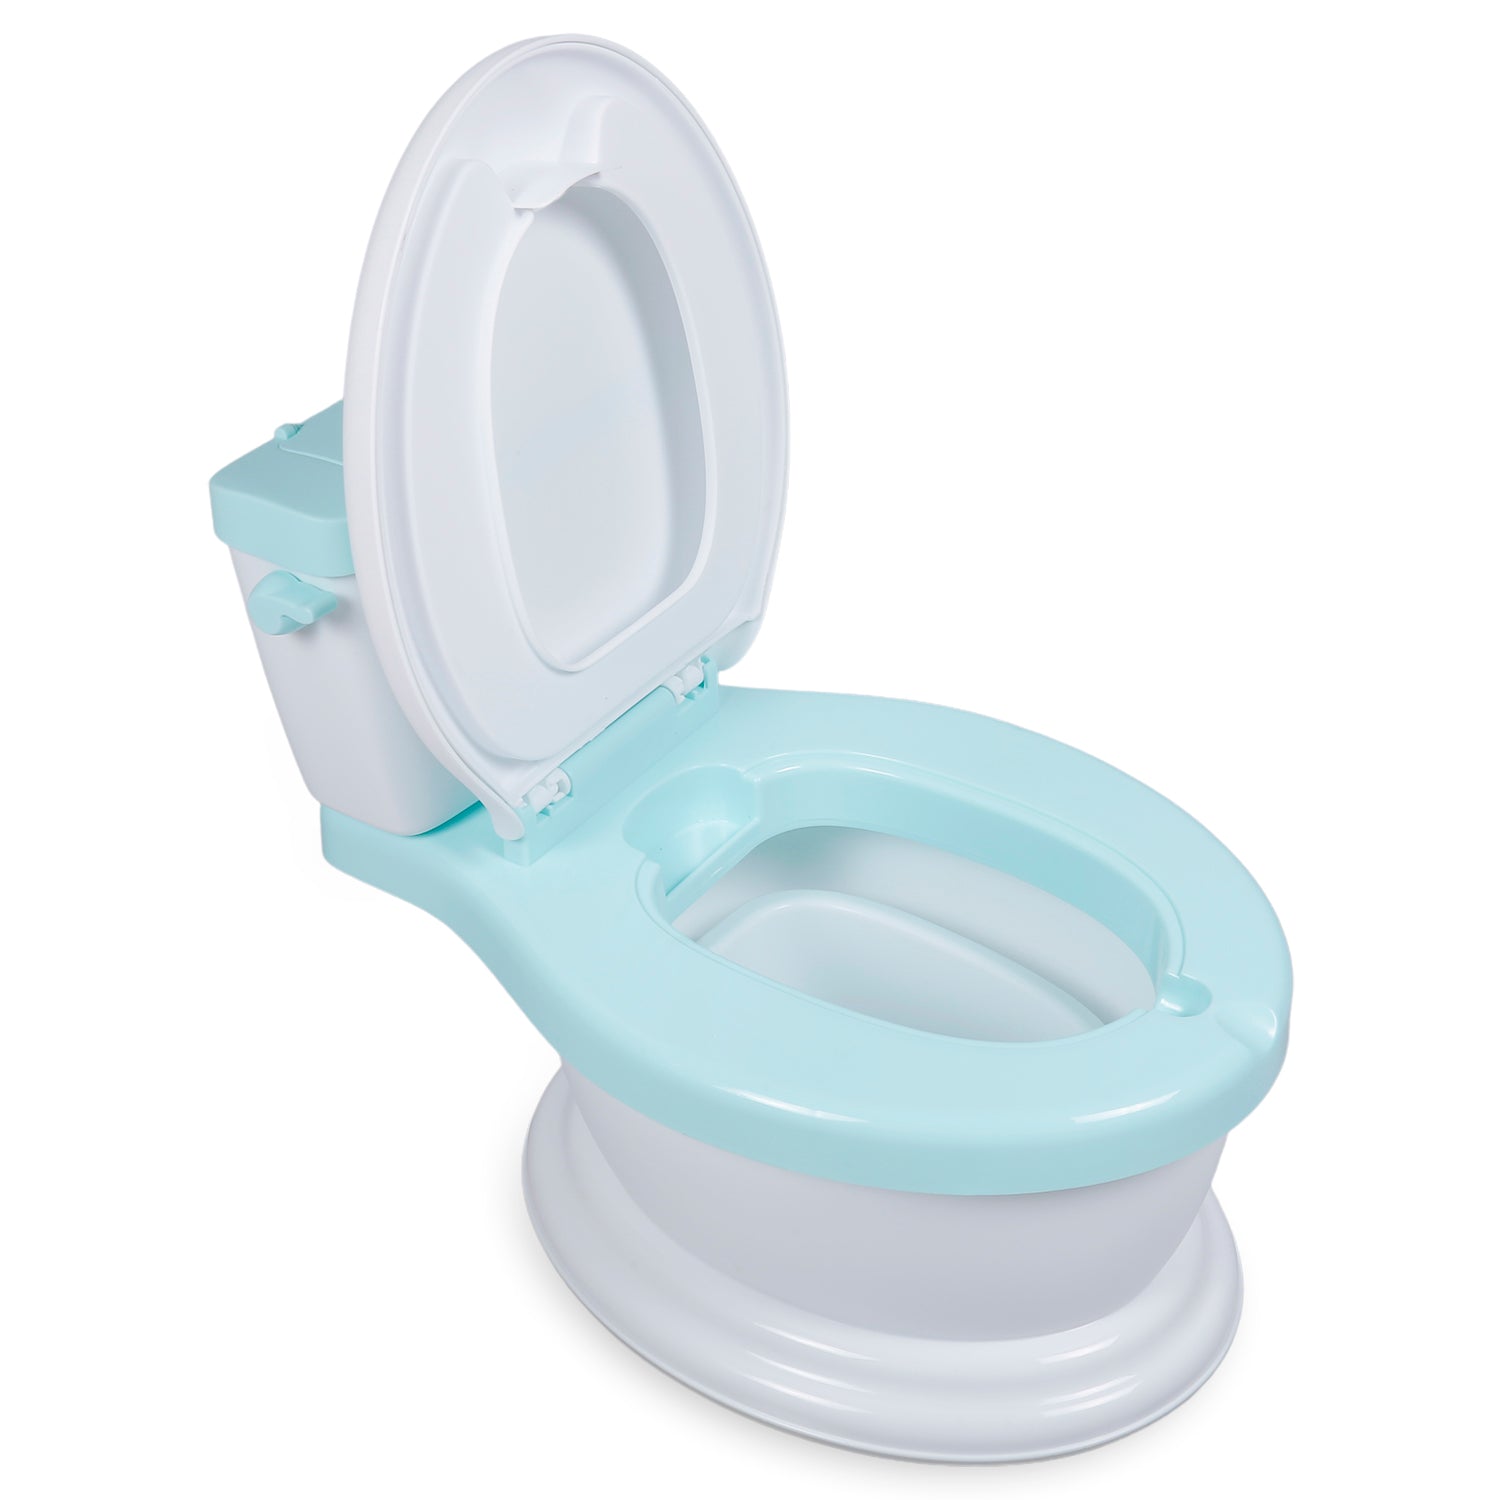 Toilet Training Potty Chair Realistic Western Style Blue - Baby Moo